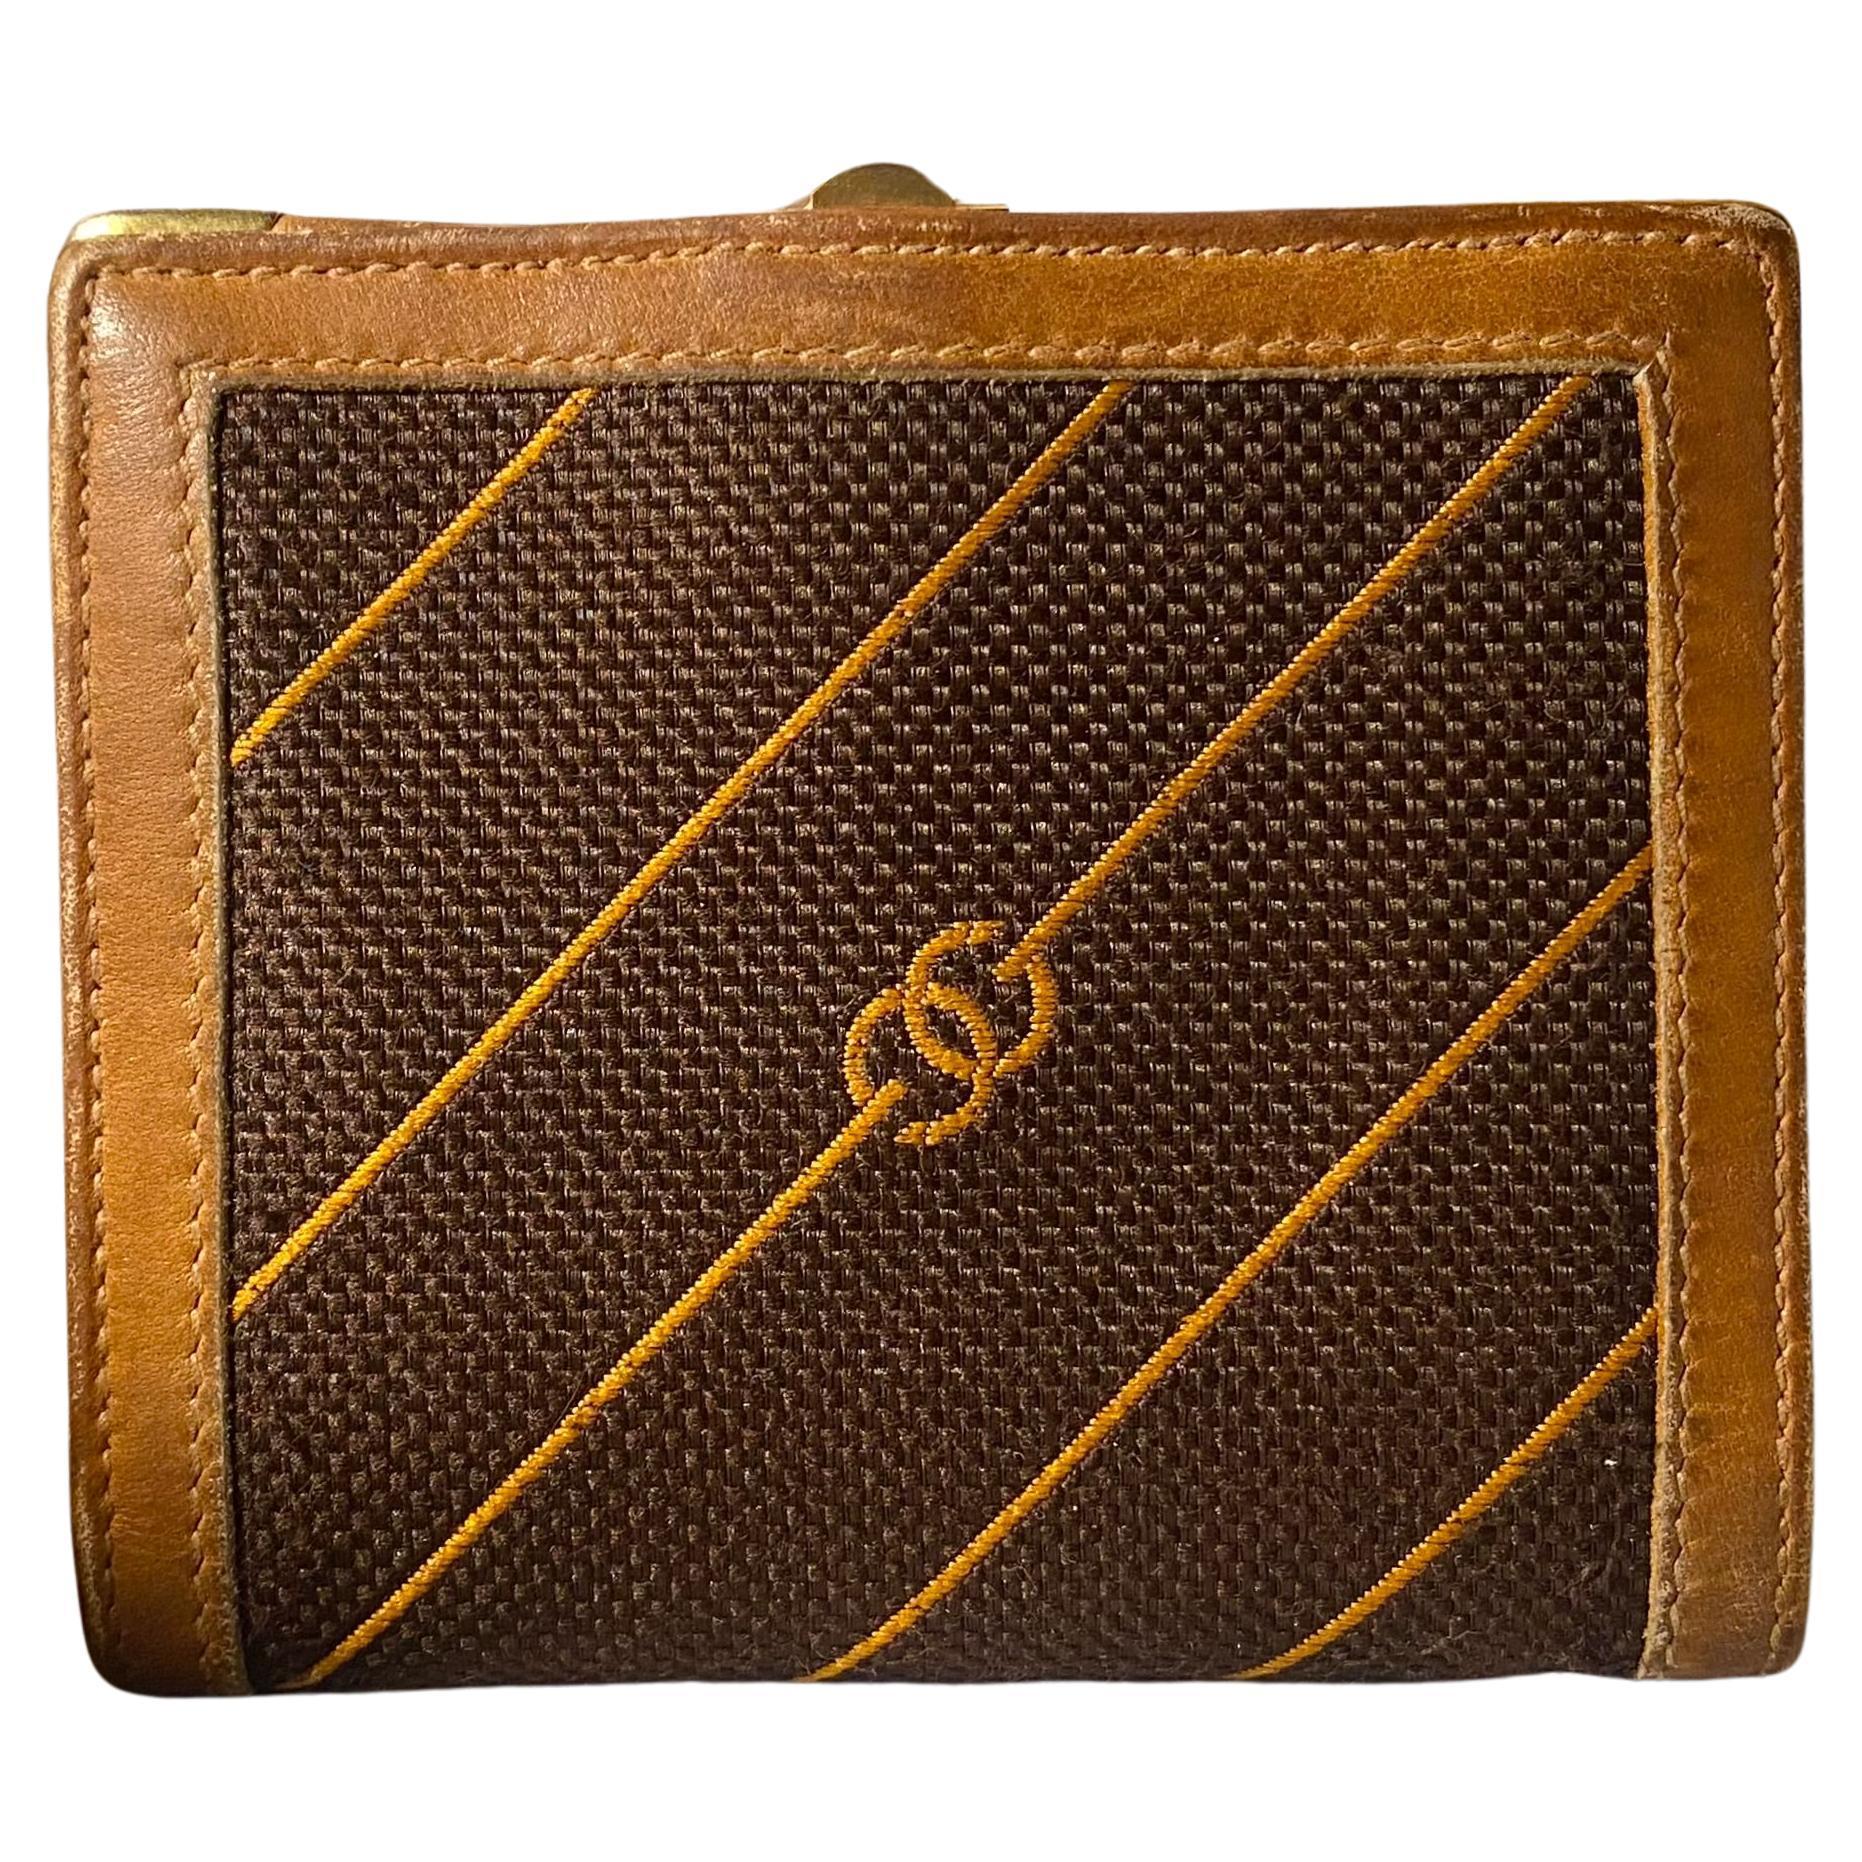 This luxurious Gucci wallet boasts a stunning GG interlocking clutch closure in both light and dark brown canvas. The premium brown leather and gold hardware add a touch of sophistication while the interior features a convenient coin compartment,